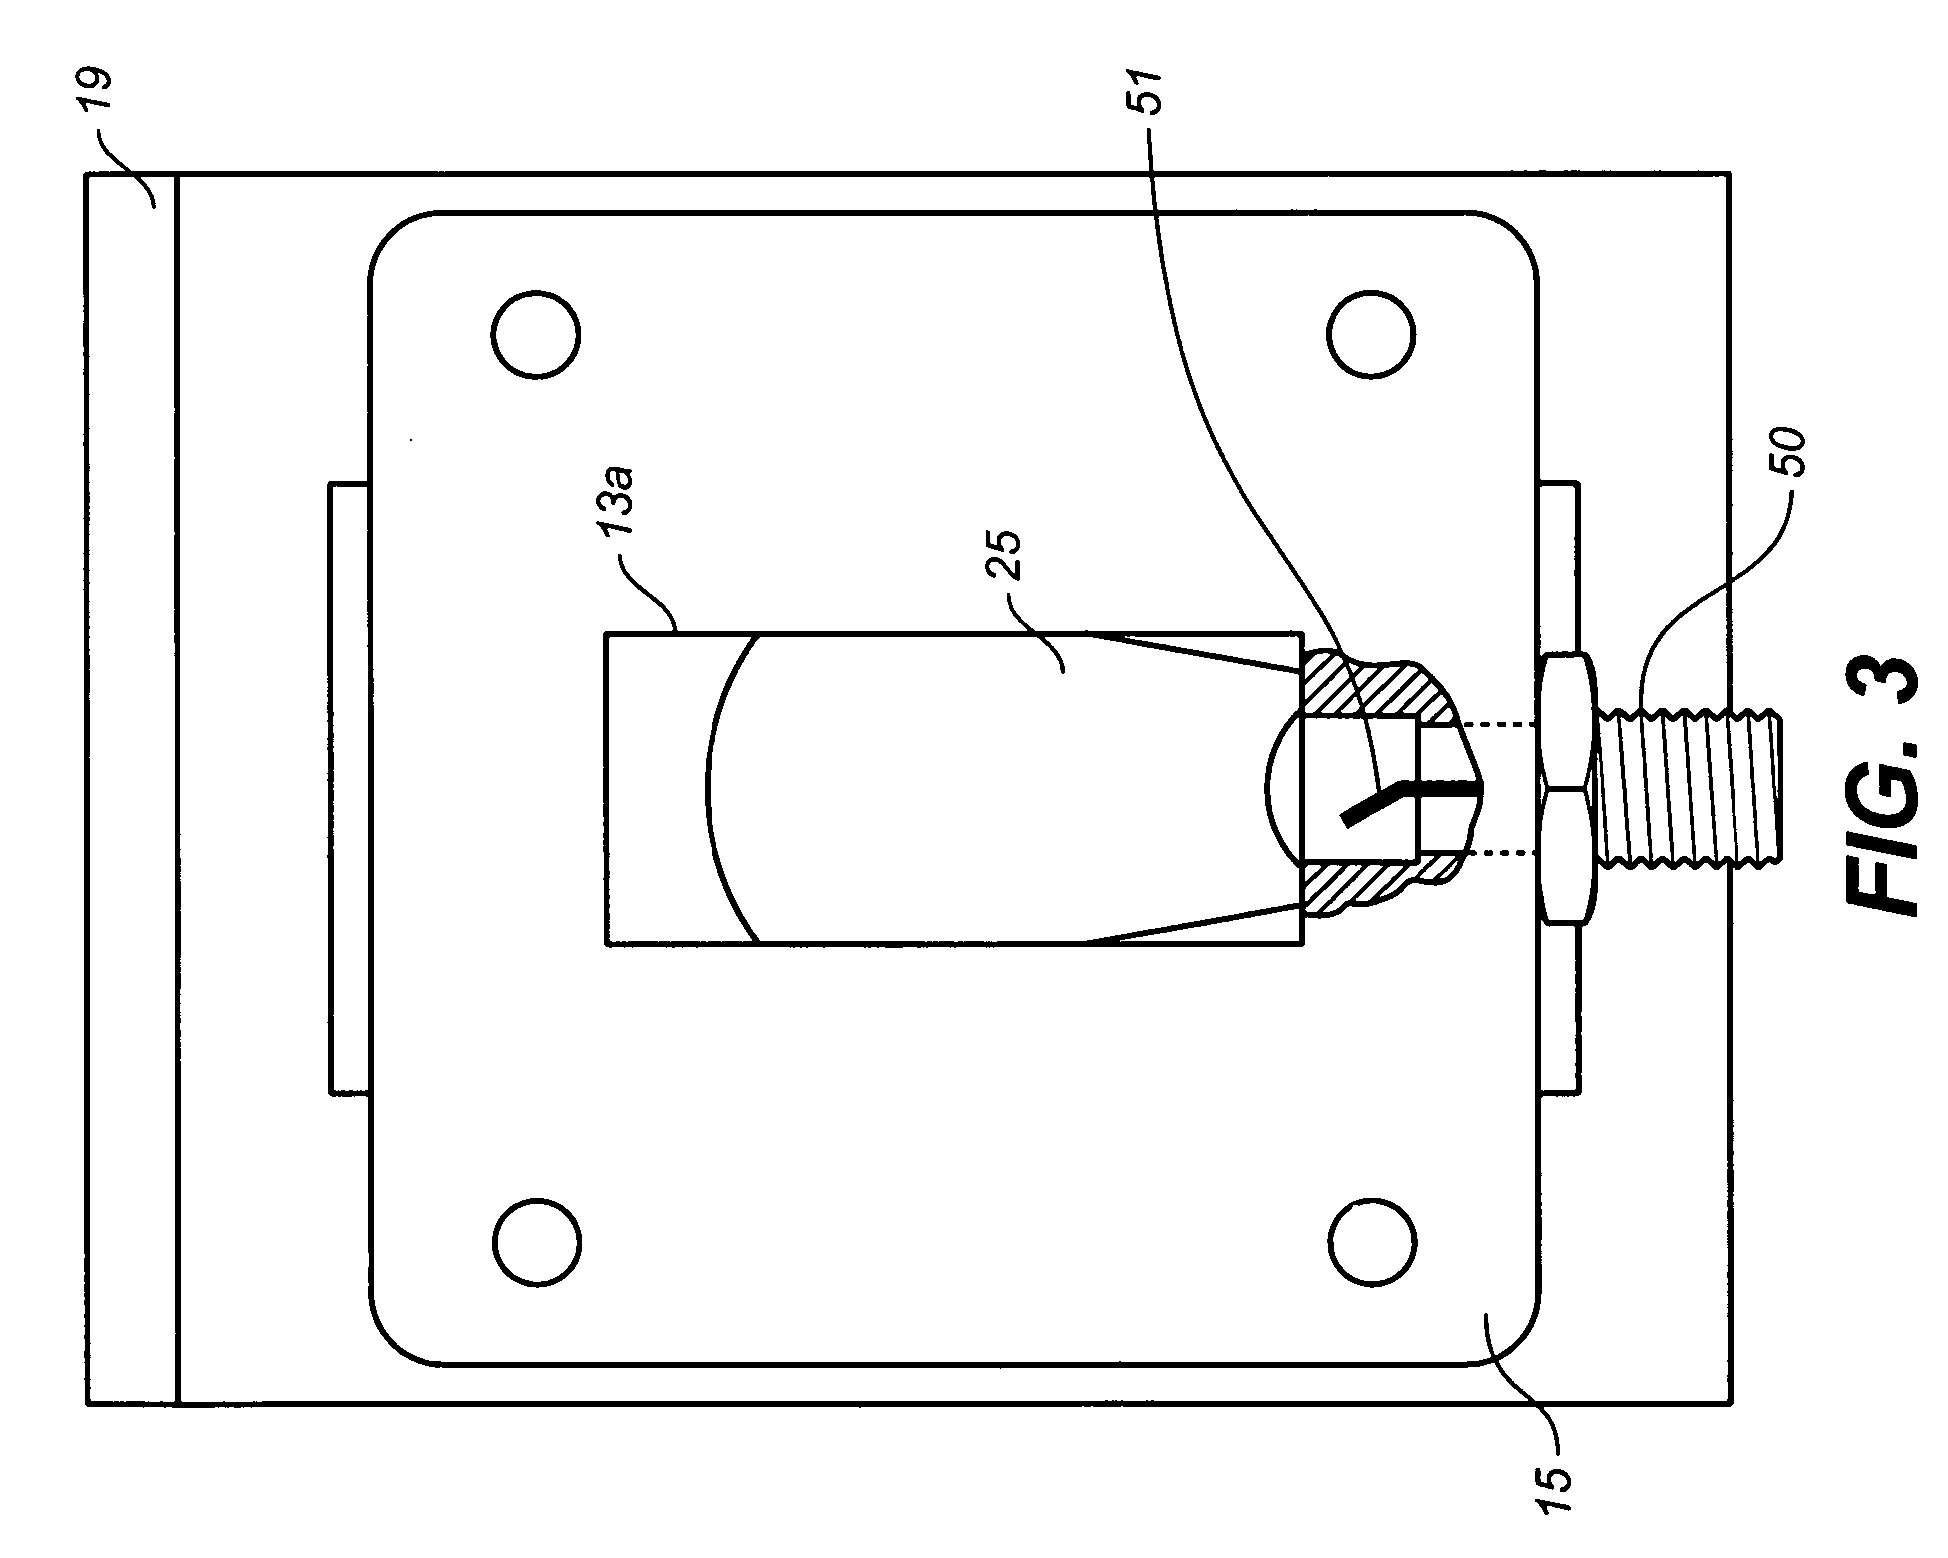 High power absorbing waveguide termination for a microwave transmission line